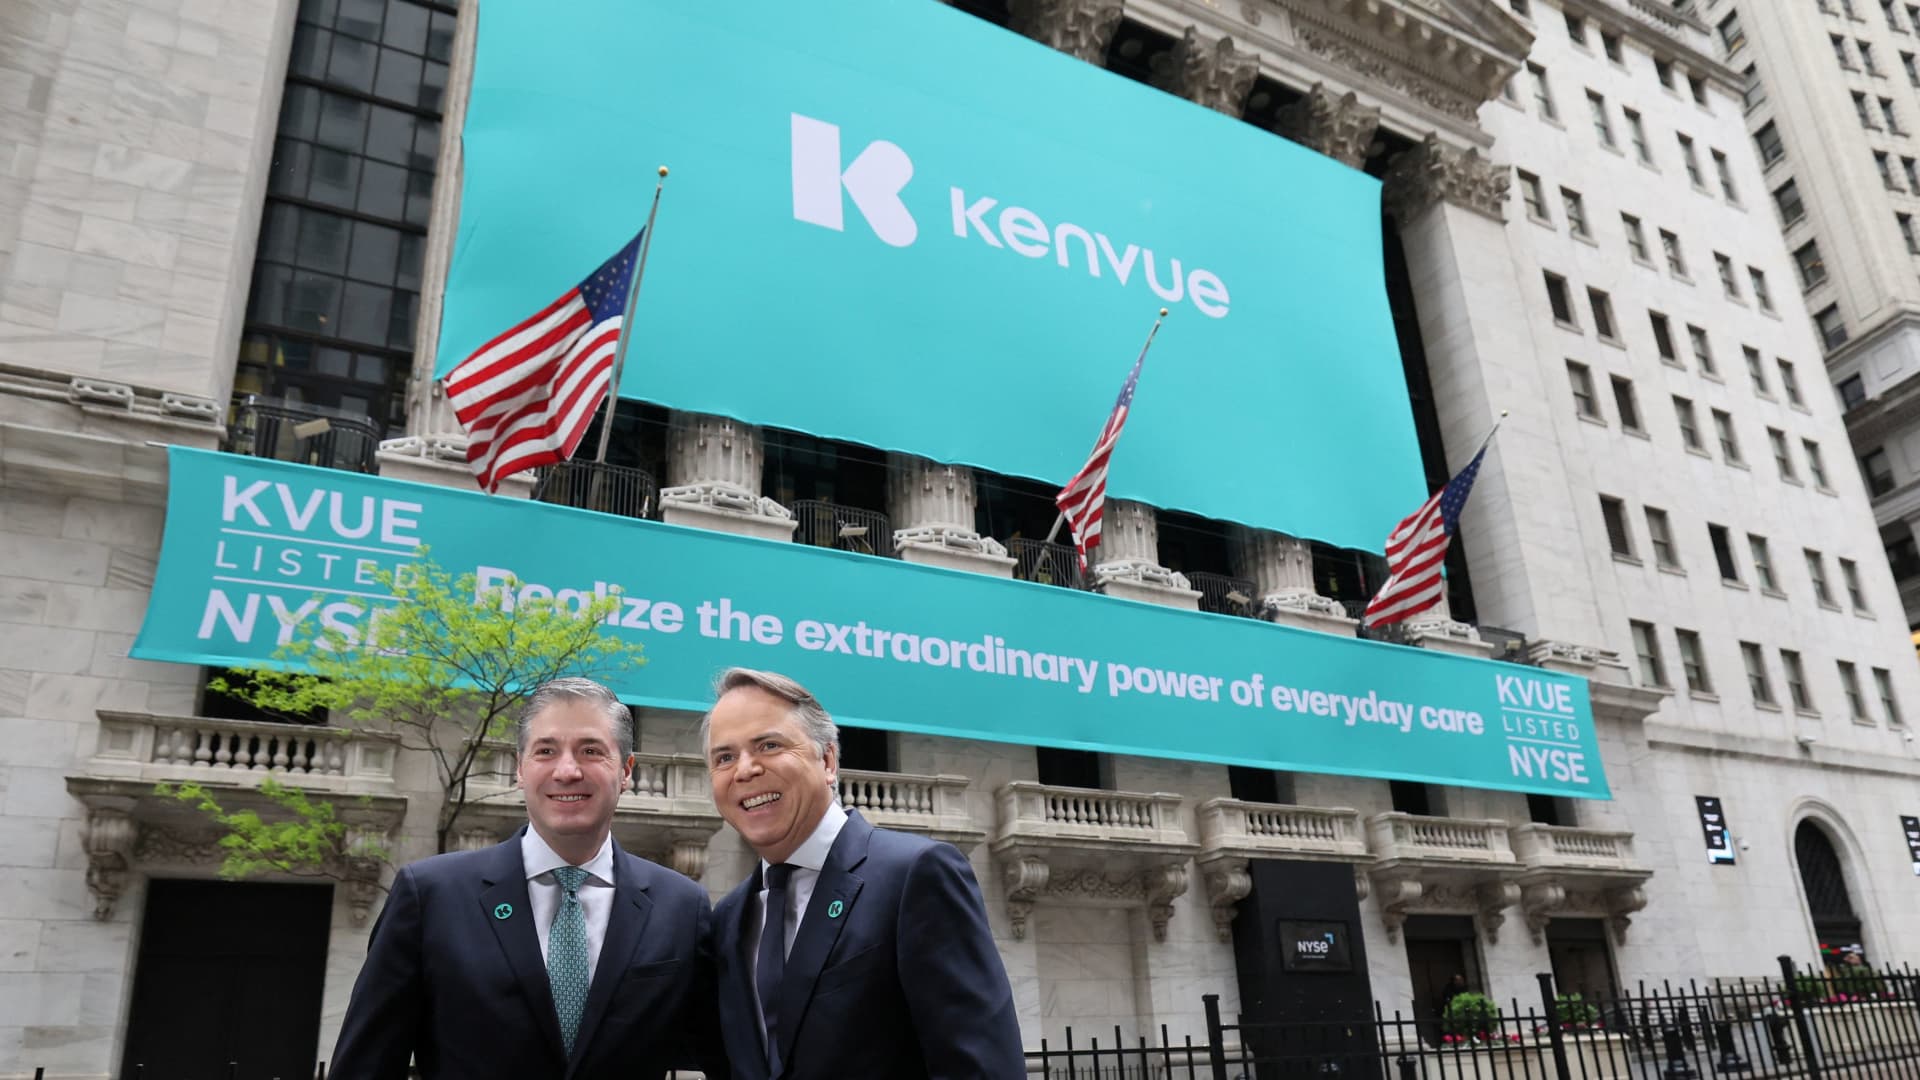 Johnson & Johnson investors can soon swap their shares for Kenvue stock — here’s what you need to know